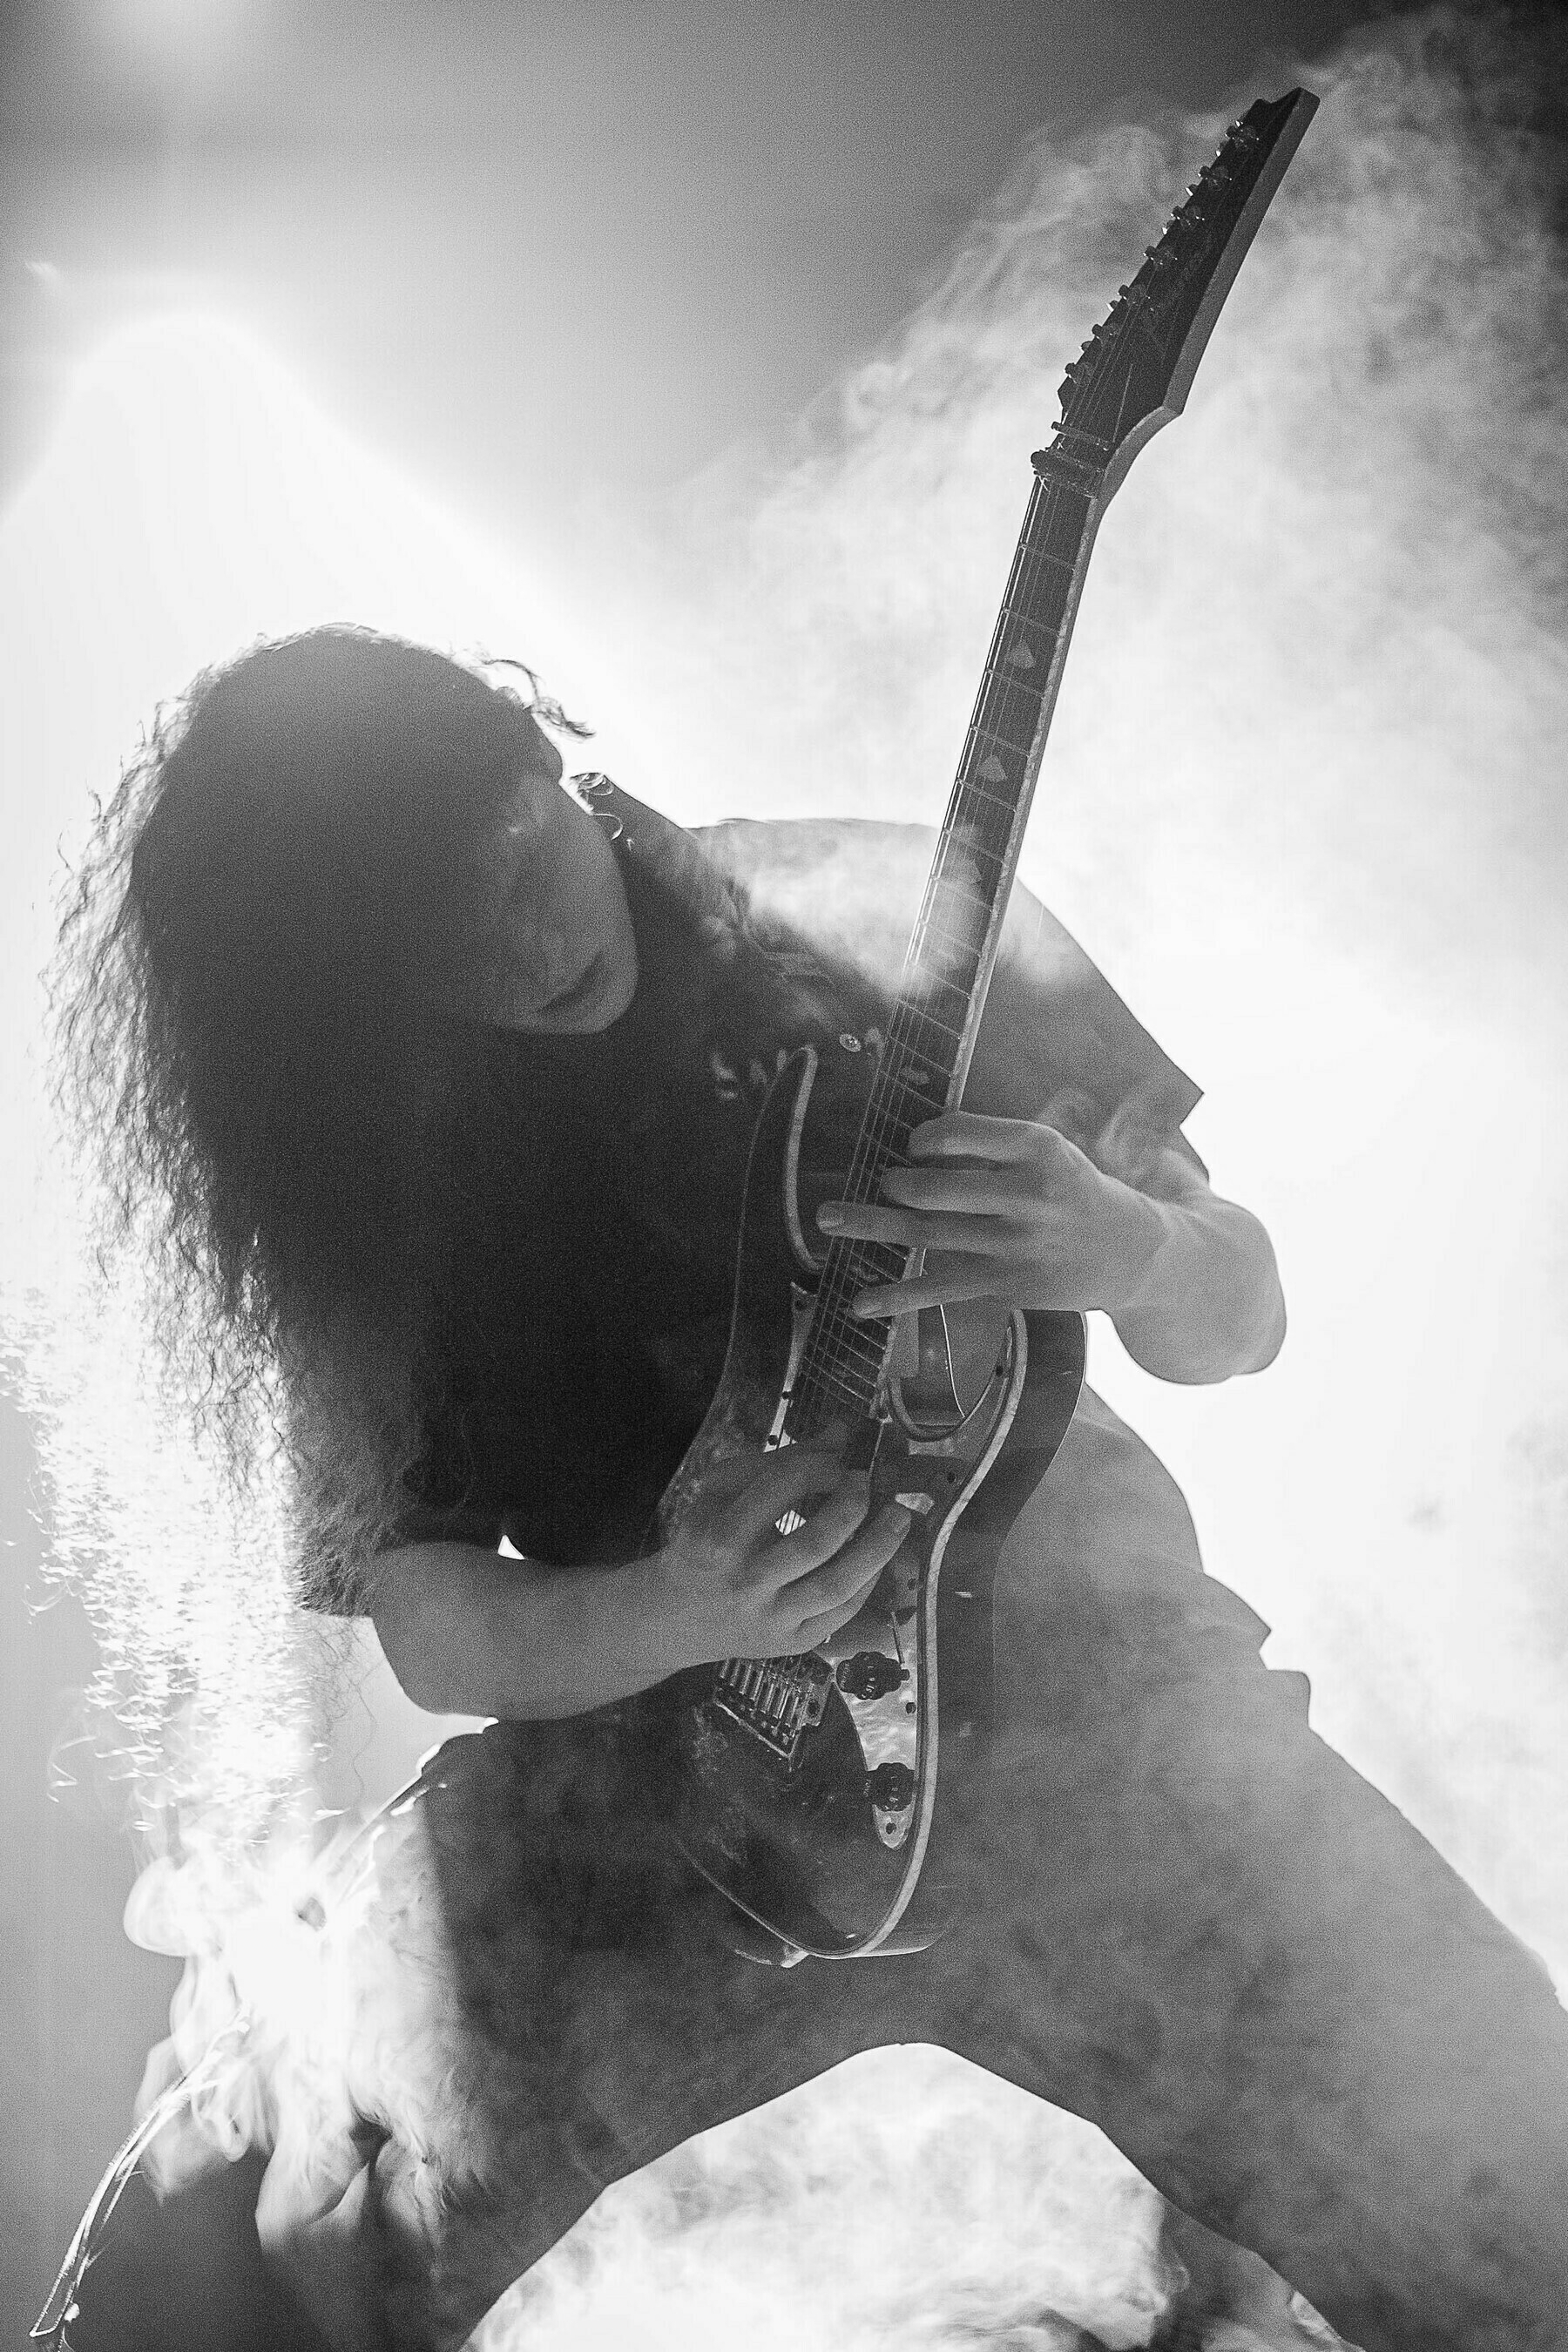 A man playing guitar in a heavy metal band with wild hair surrounded by lots of smoke.